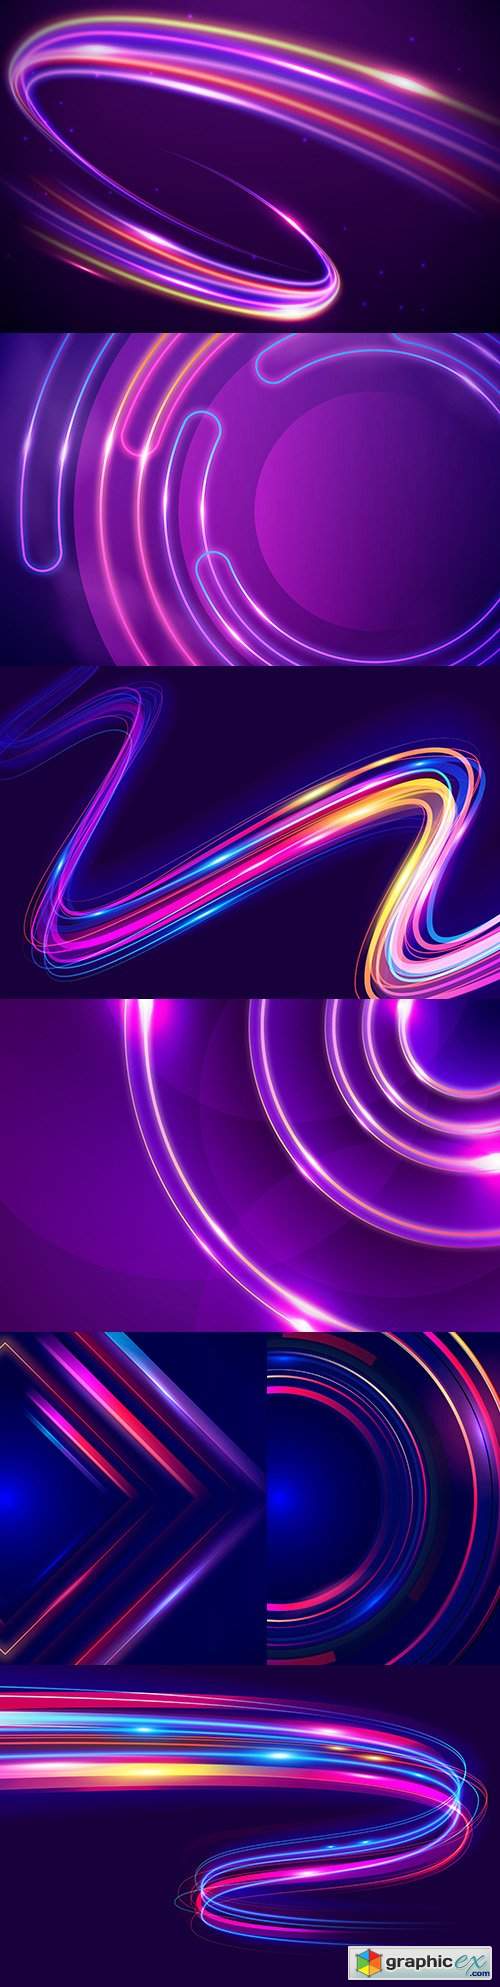  Abstract style neon lights design background 